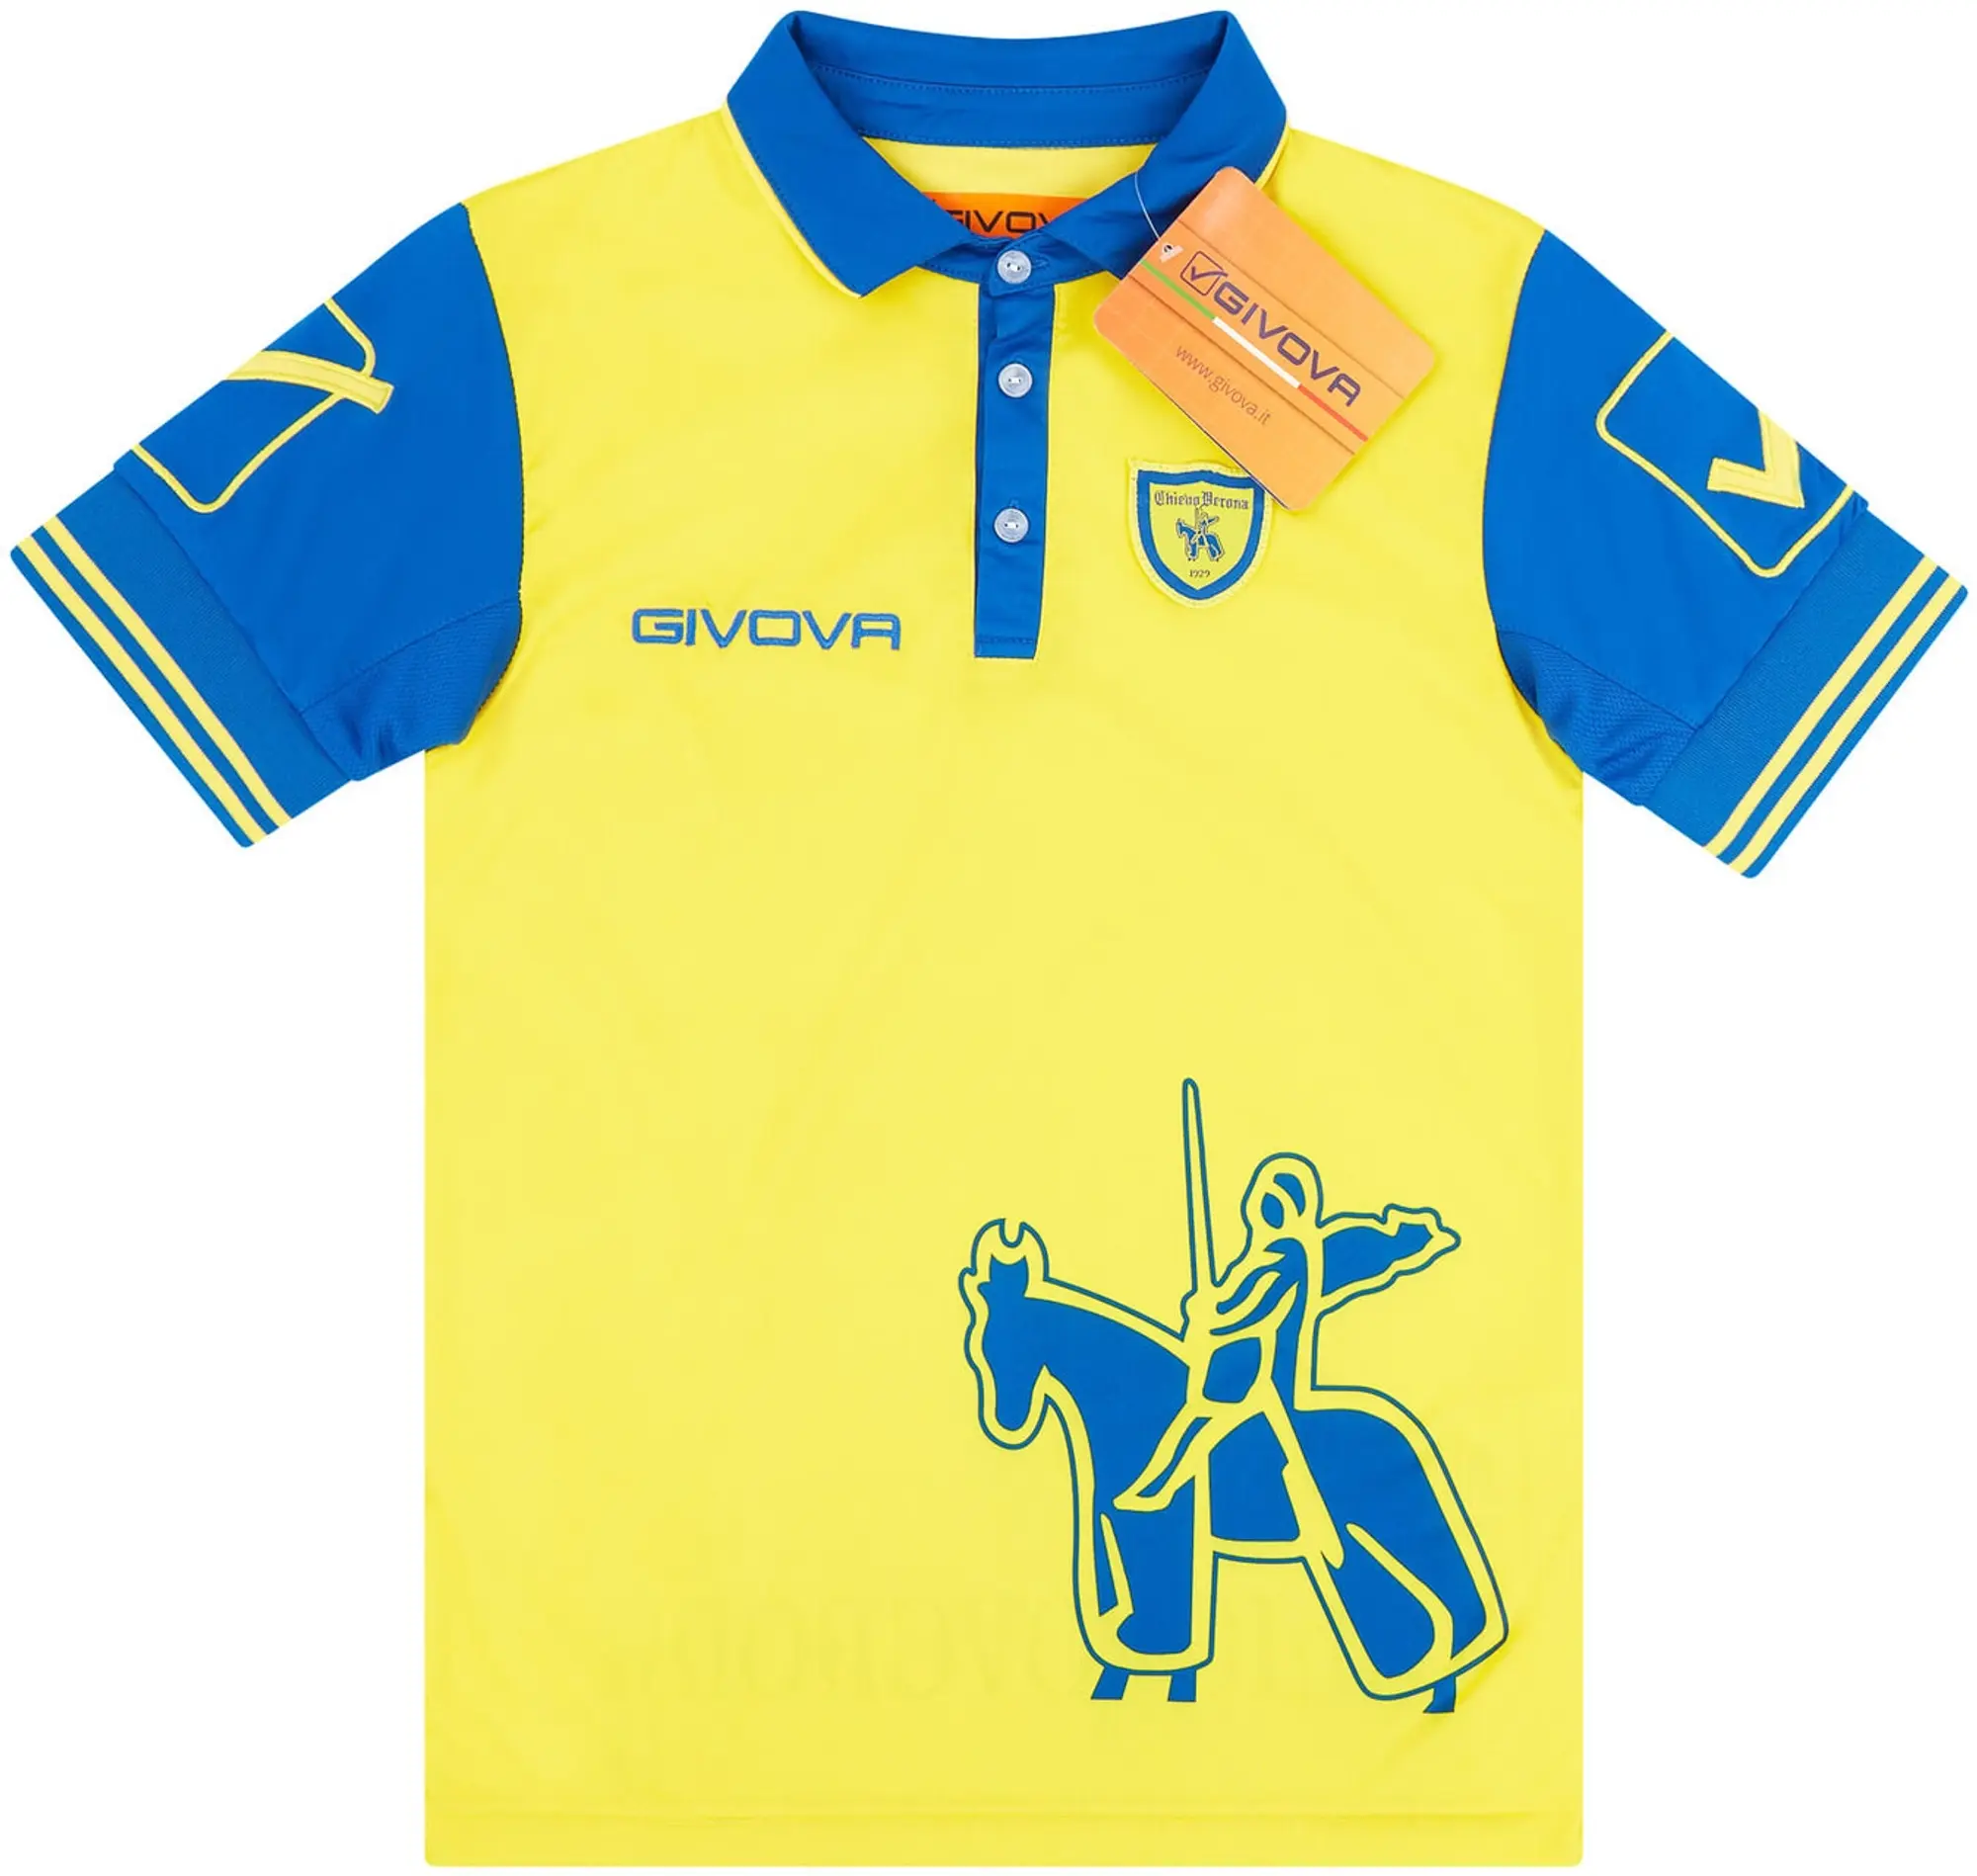 Condition of shirt - Brand new, unworn condition with original Givova tags attached Size - XXS Made by - Givova Players - Pellissier, Meggiorini, Birsa, Castro, Radovanović, Rigoni, Gobbi Notes - Sponsorless home shirt worn in the season when the Flying Donkeys finished 9th in Serie A and reached the Third Round of the Coppa Italia Chievo Mens SS Home Shirt 2015/16